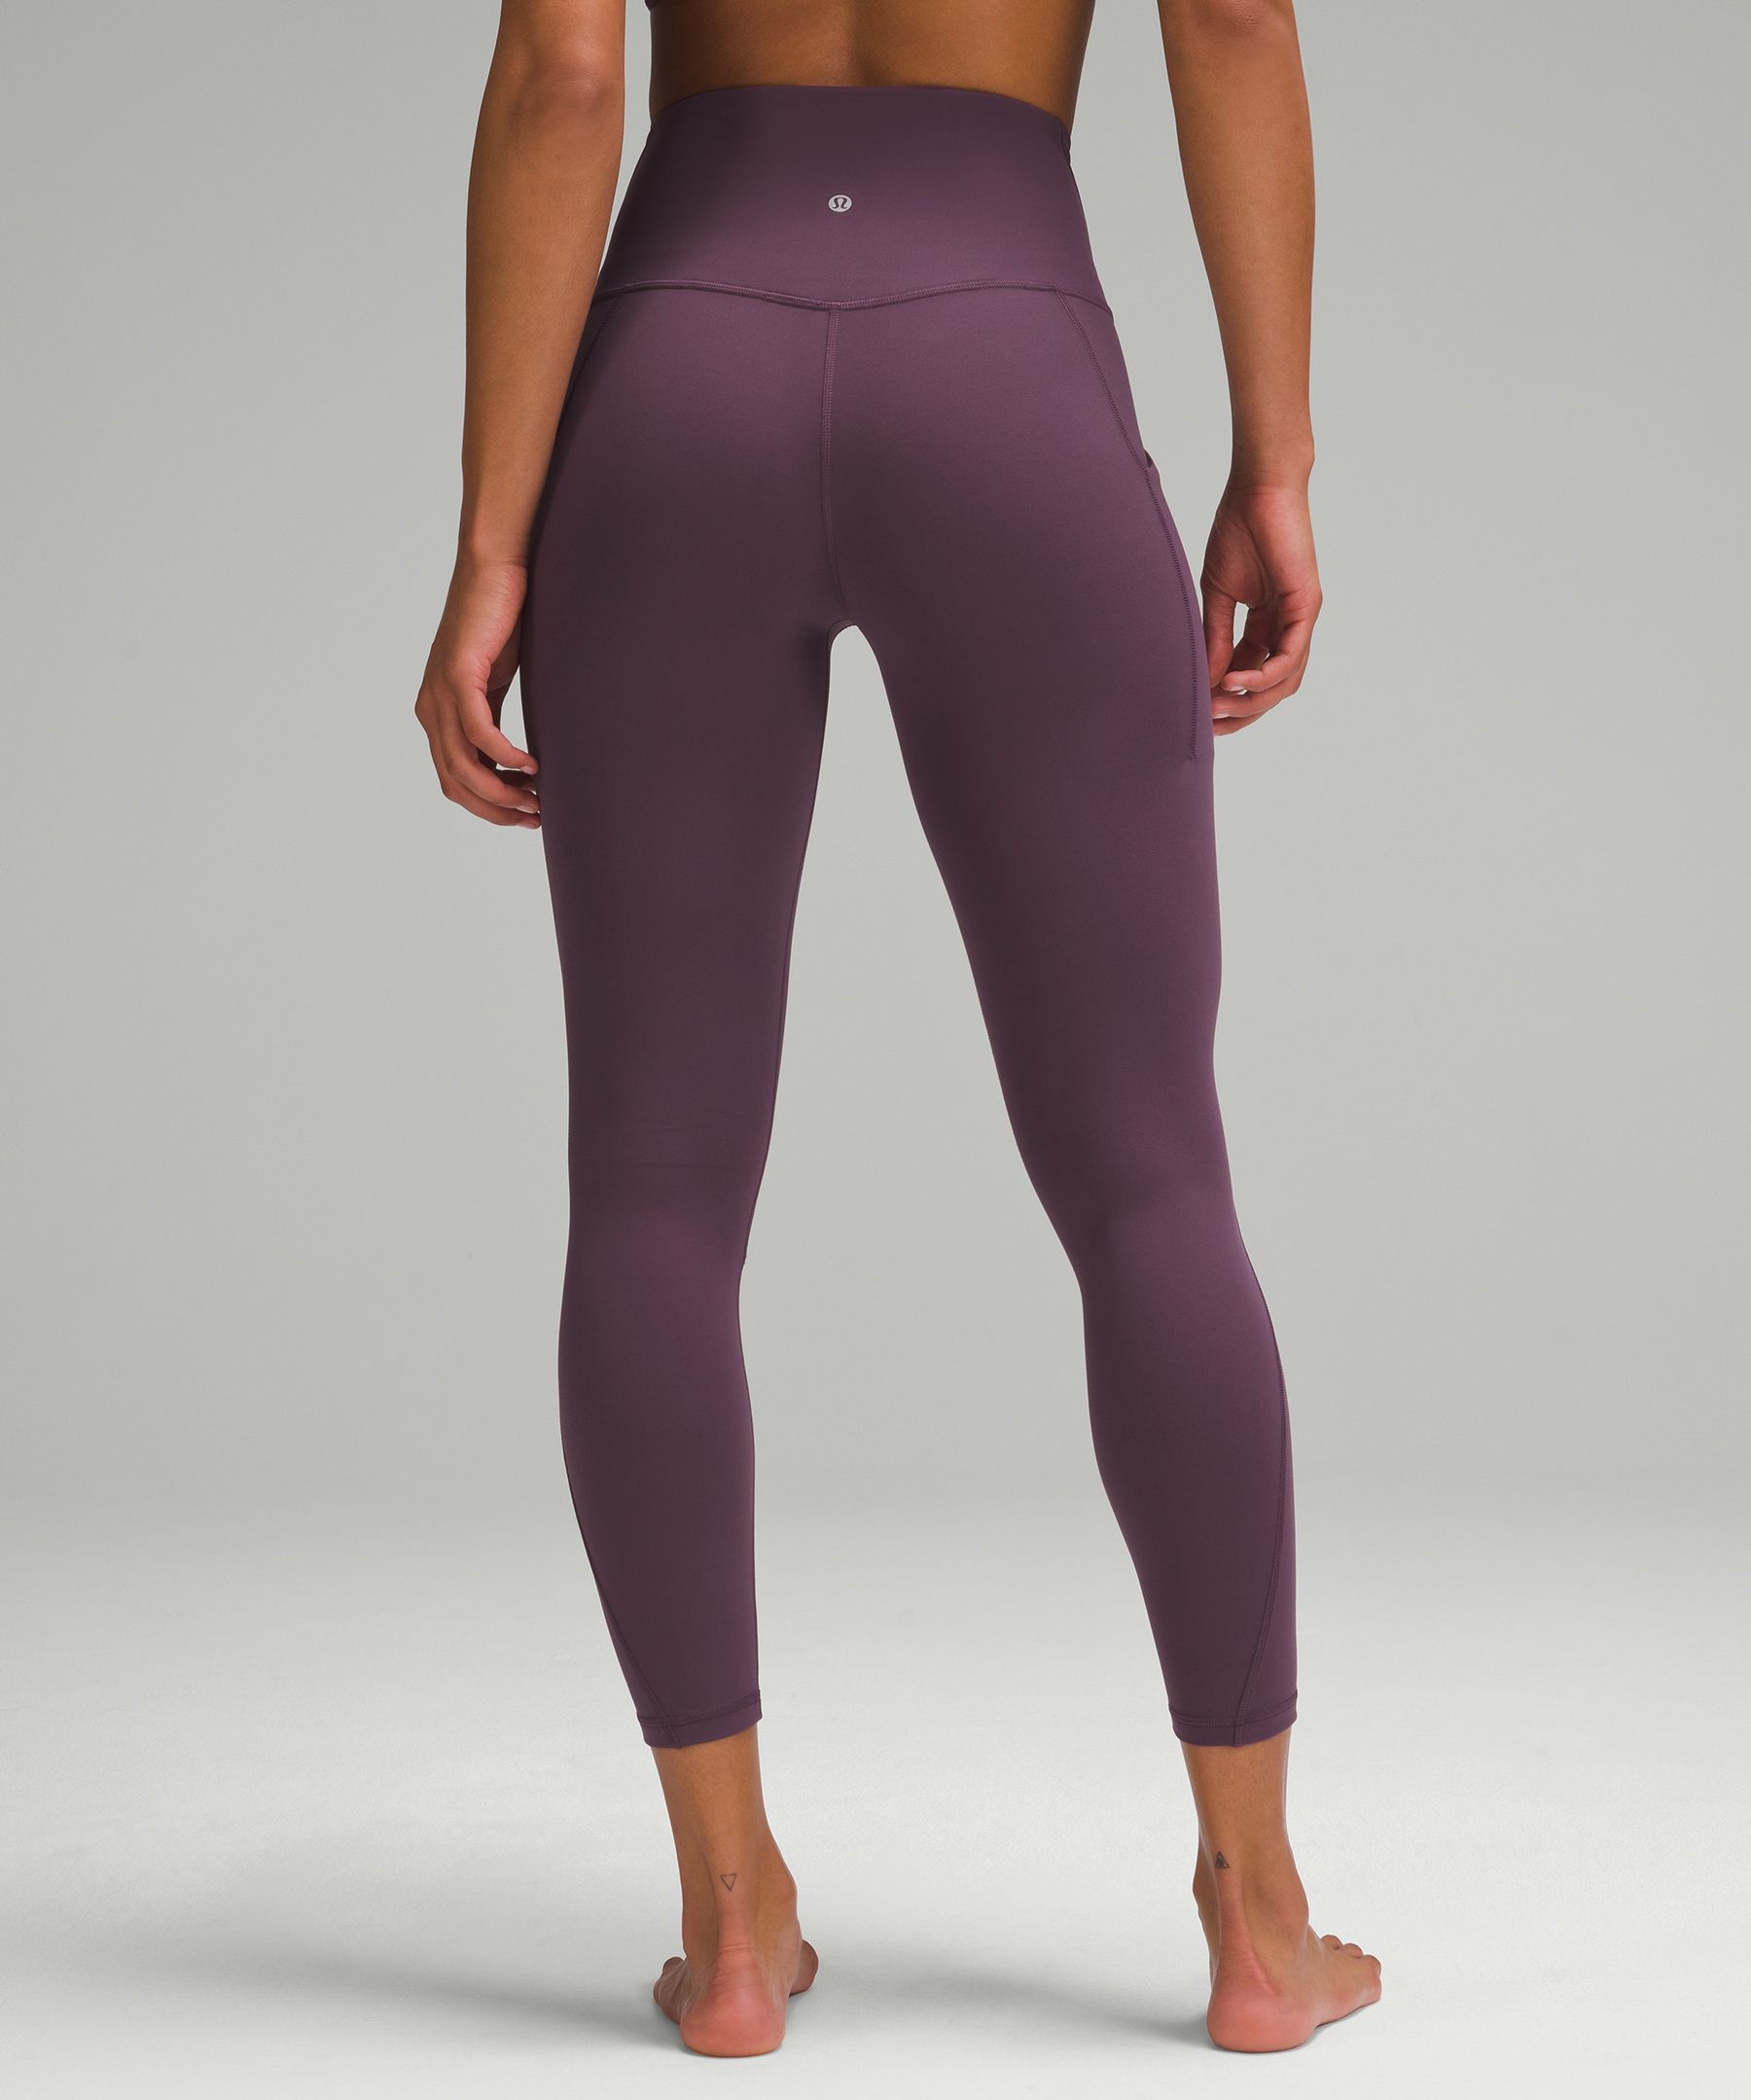 lululemon Align™ High-Rise Pant with Pockets 25 Palm Court Size 2